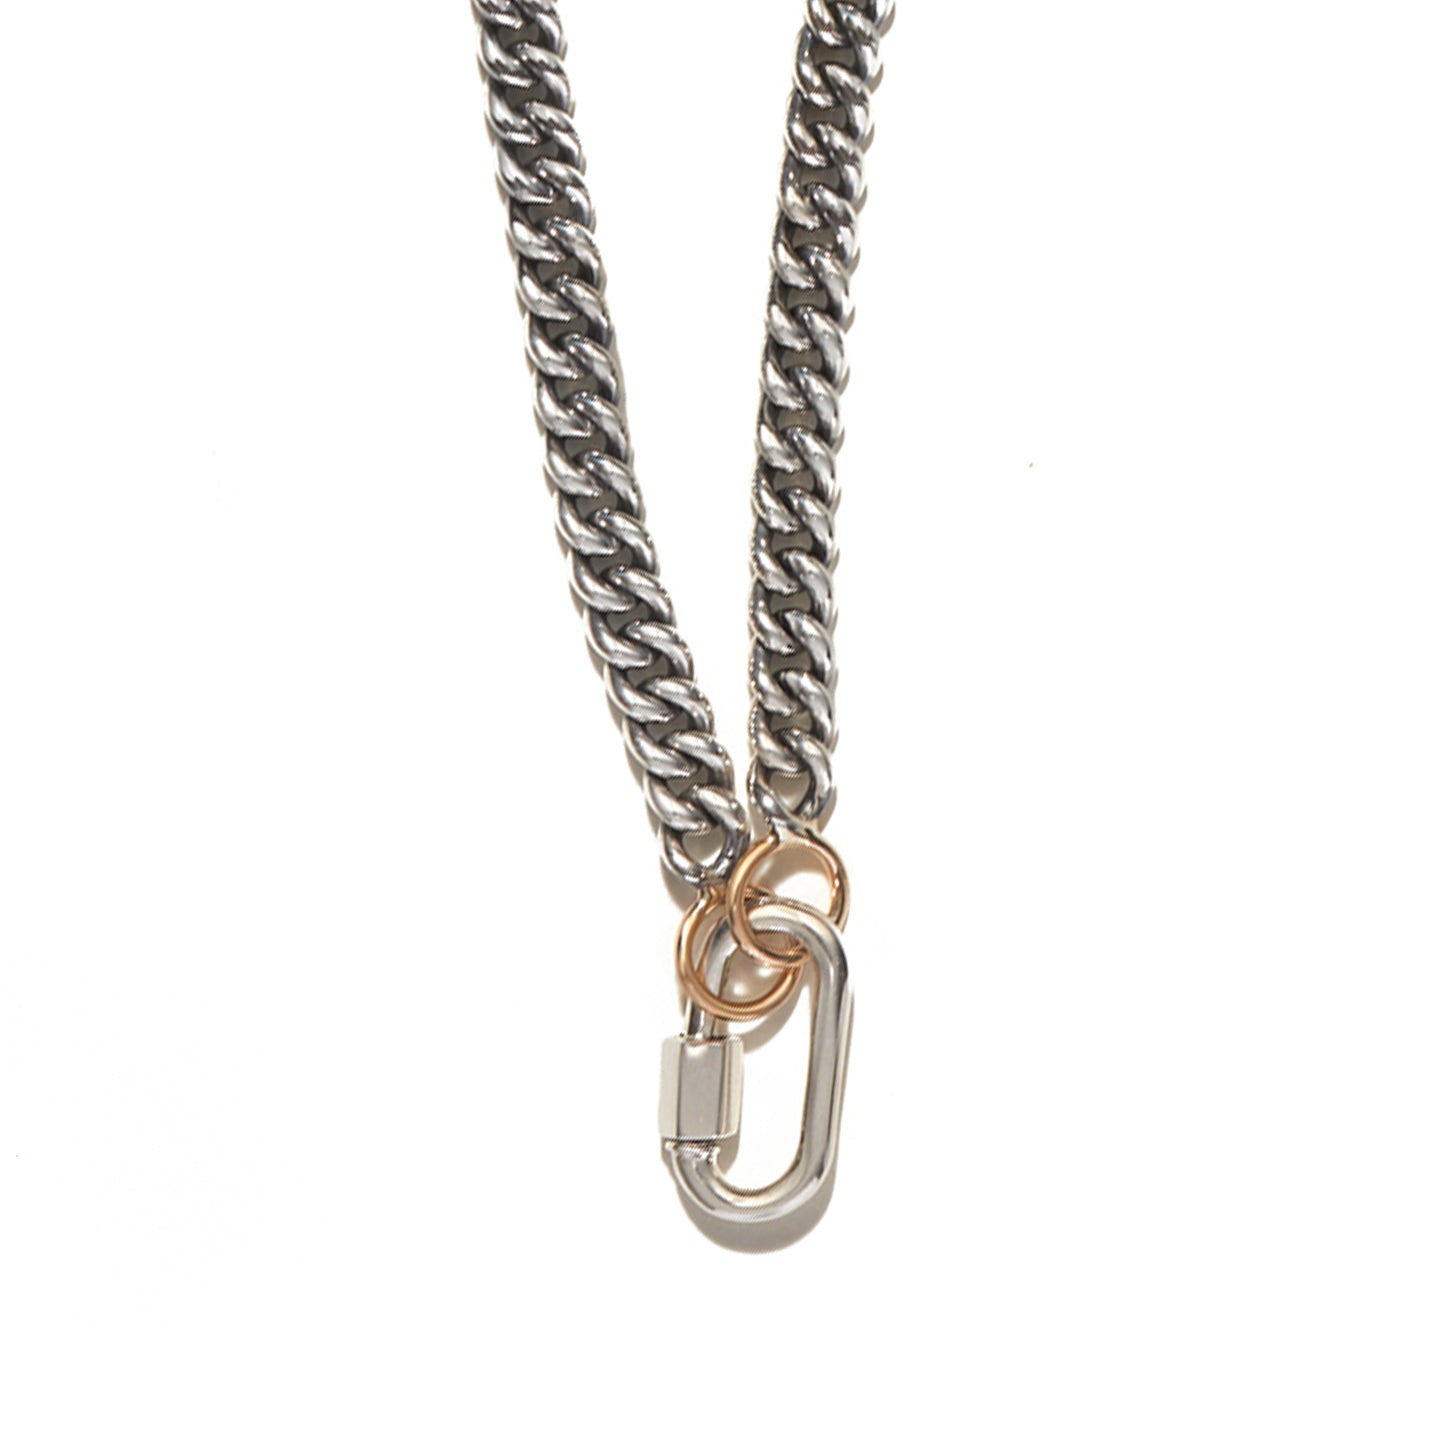 Gold Carabiner Necklace-Chunky Multilink Chain Necklace-Gold 16 / #2 Silver/Silver